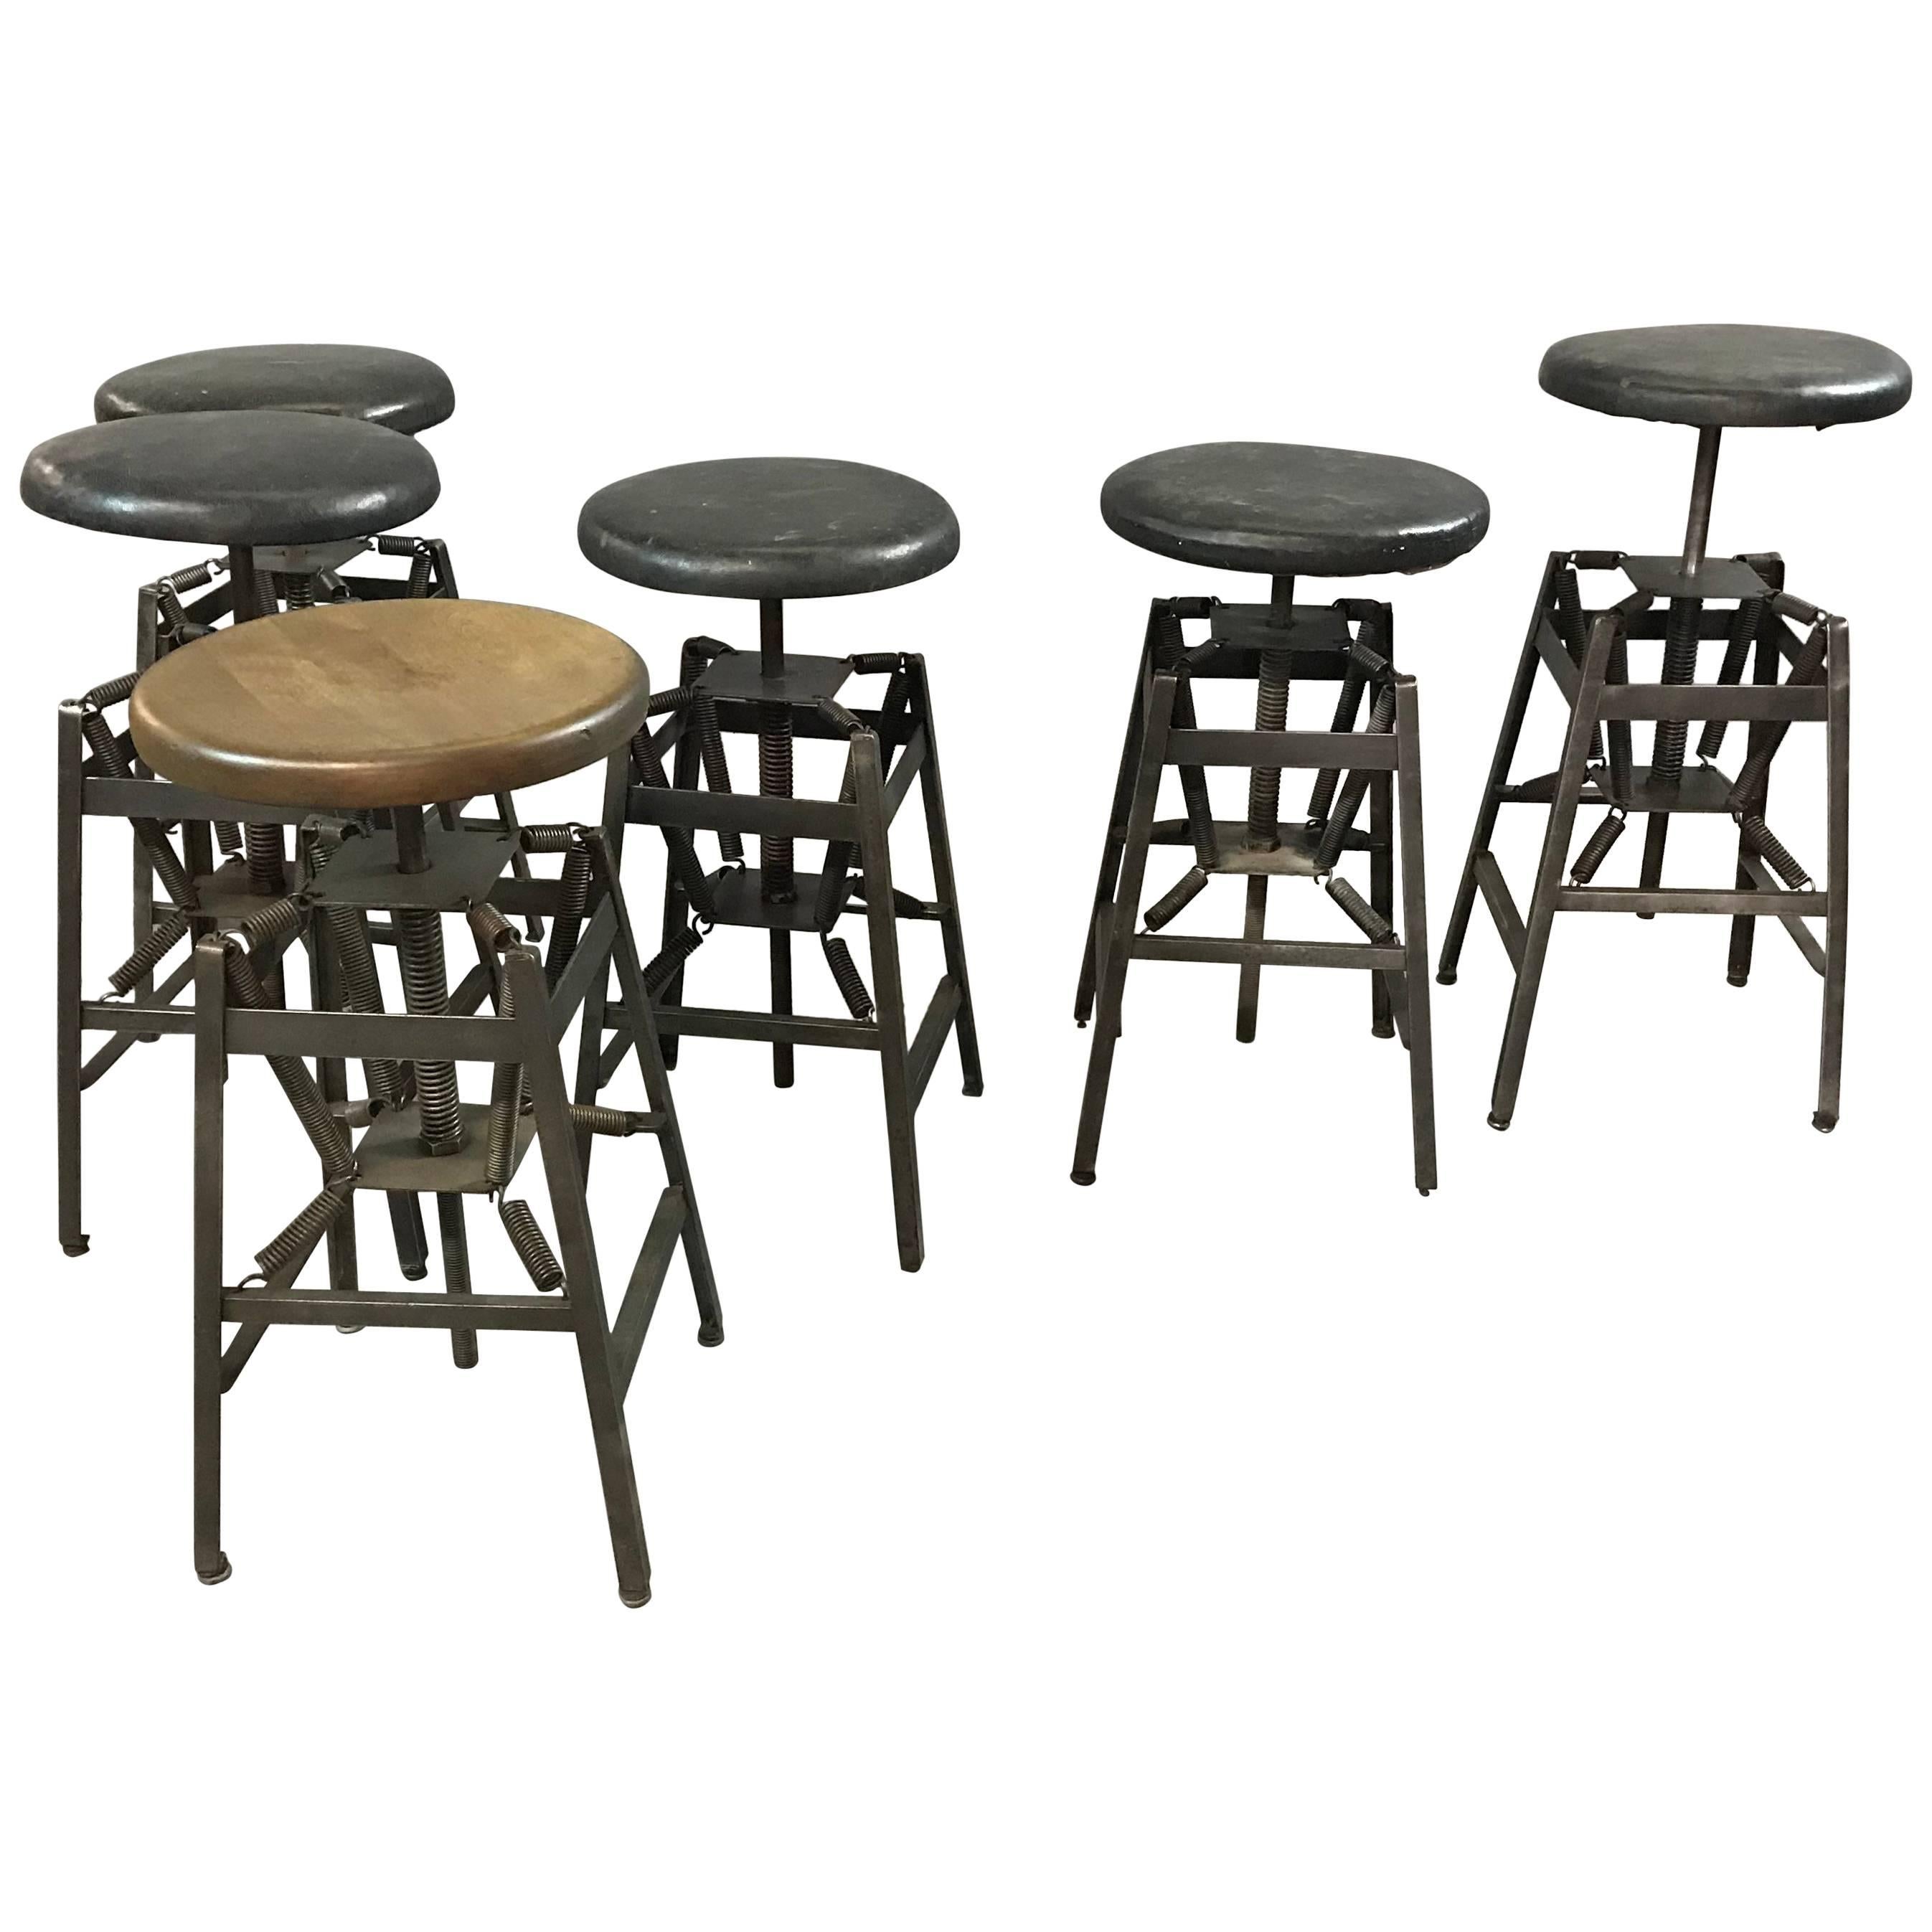 Industrial Adjustable Drafting Spring Stools by American Cabinet Co.